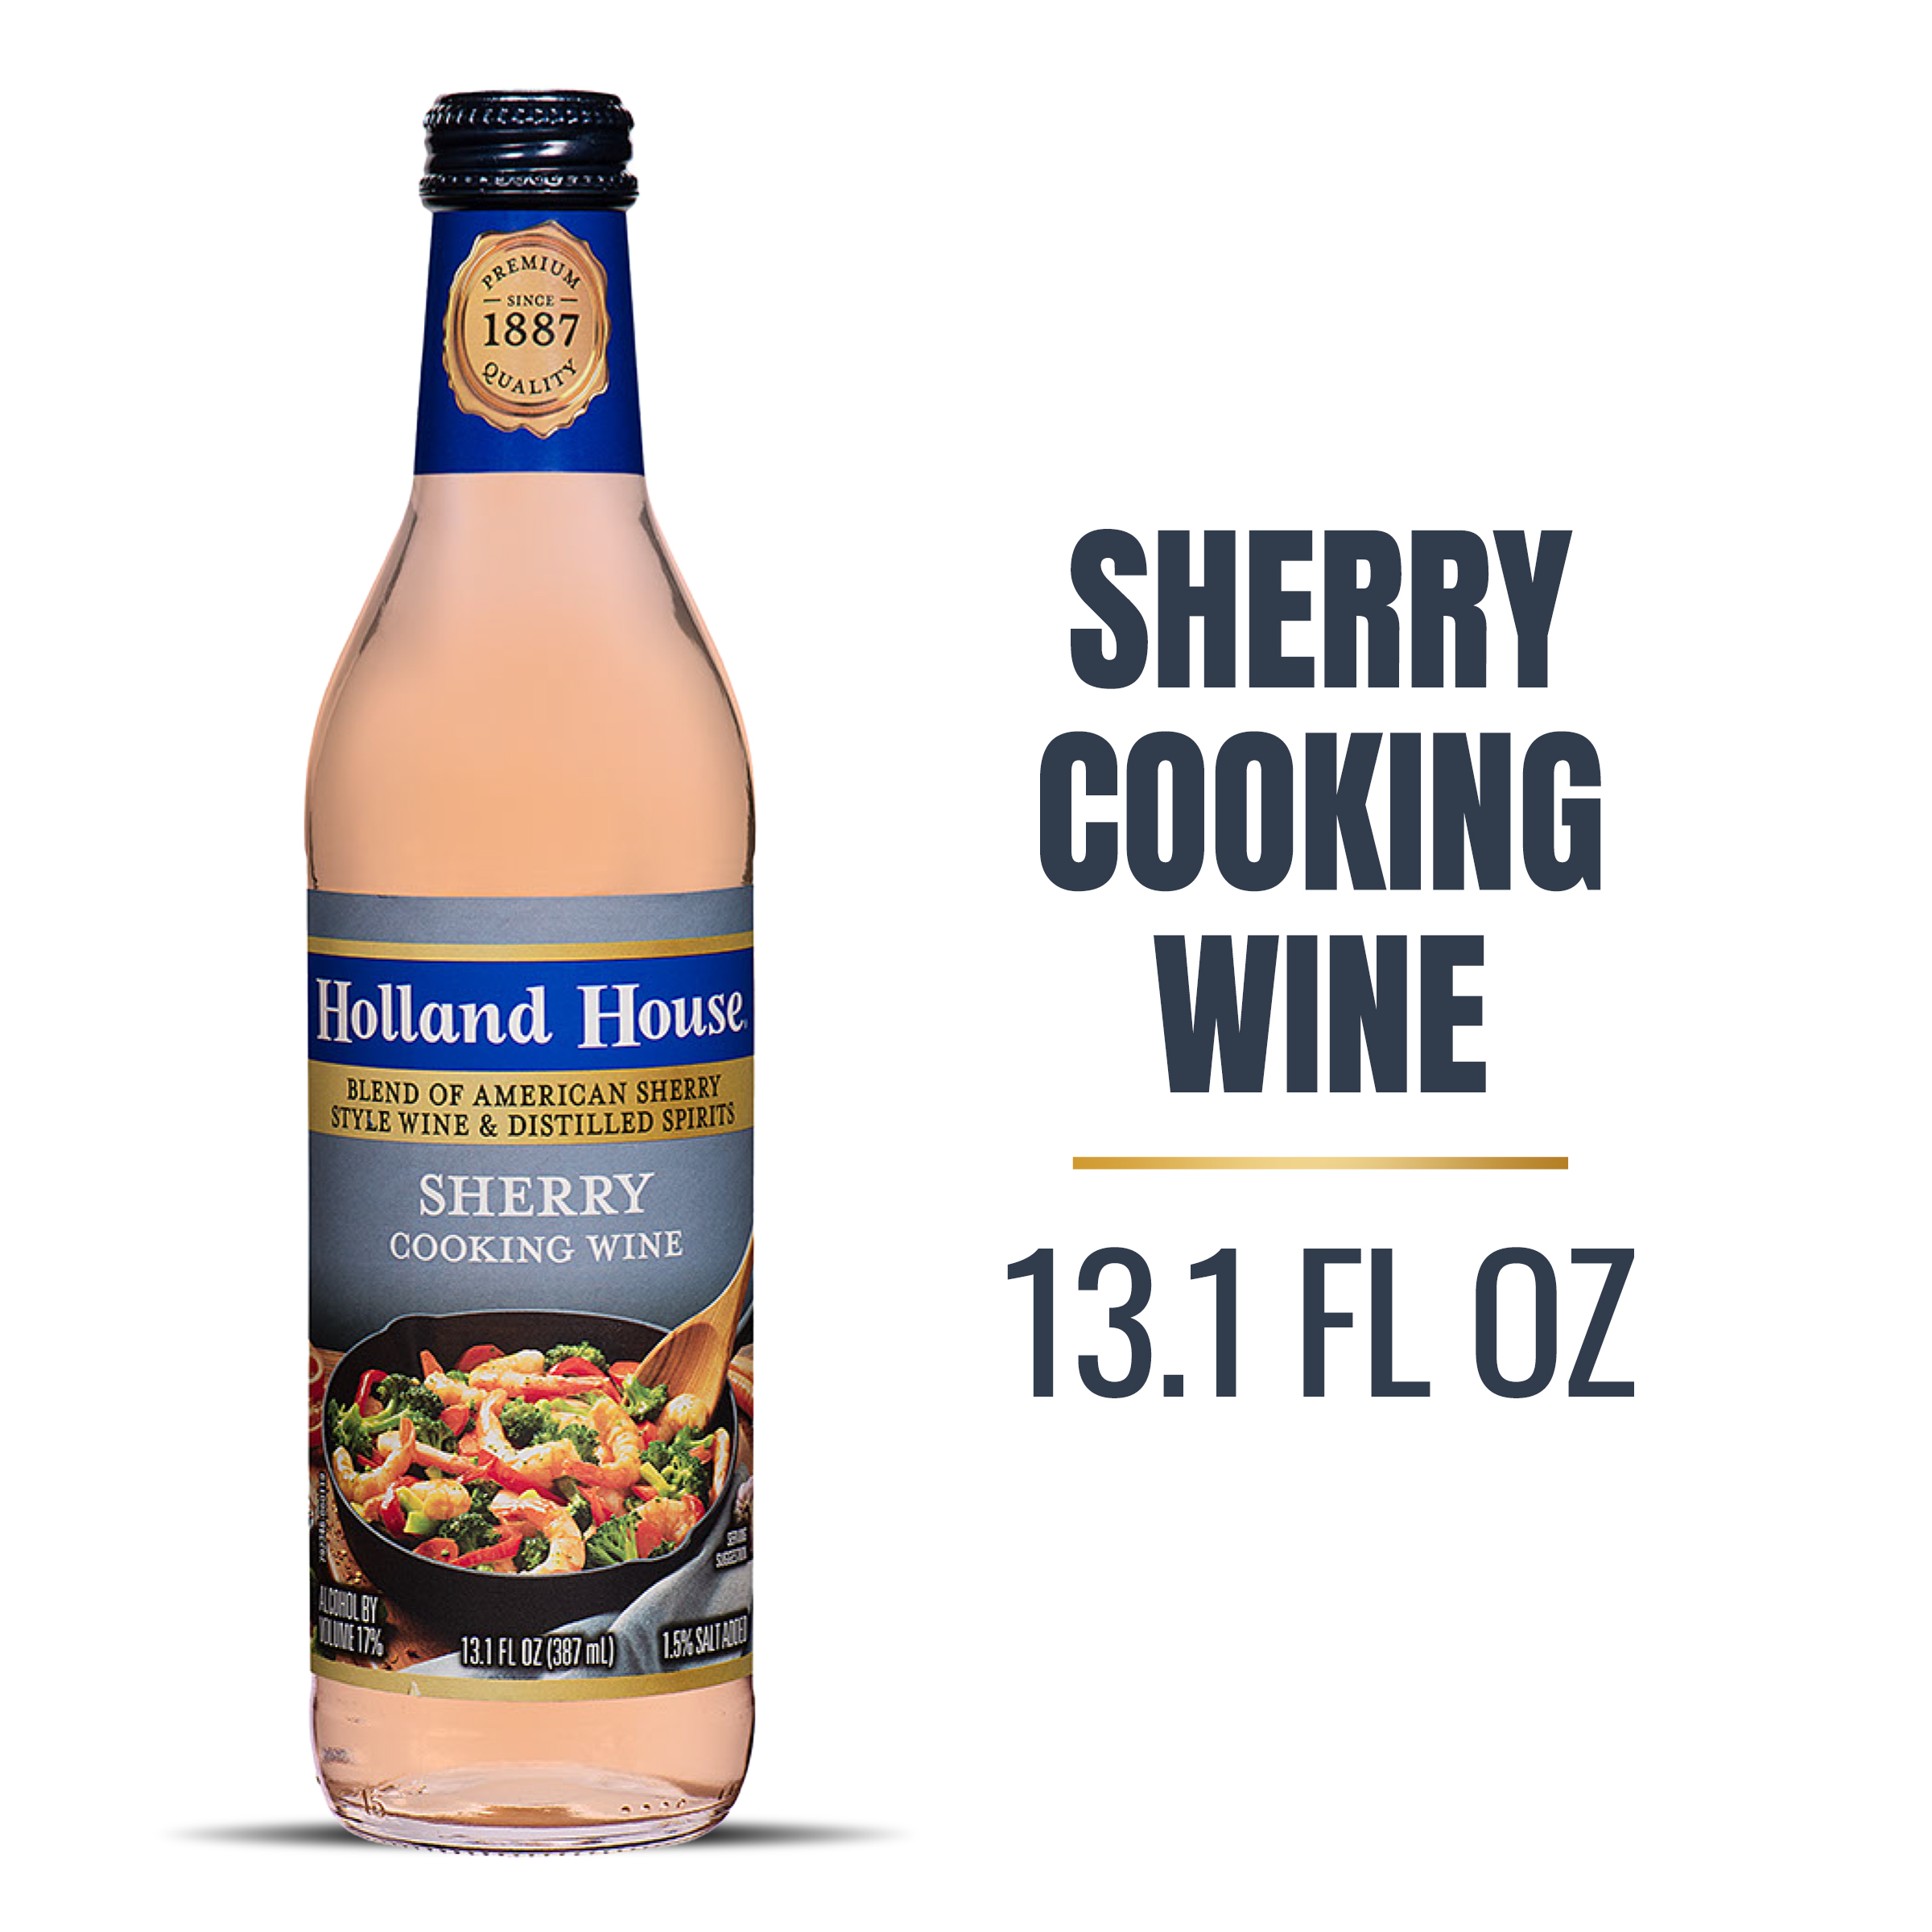 Holland House Sherry Cooking Wine, 13 fl oz - image 1 of 10